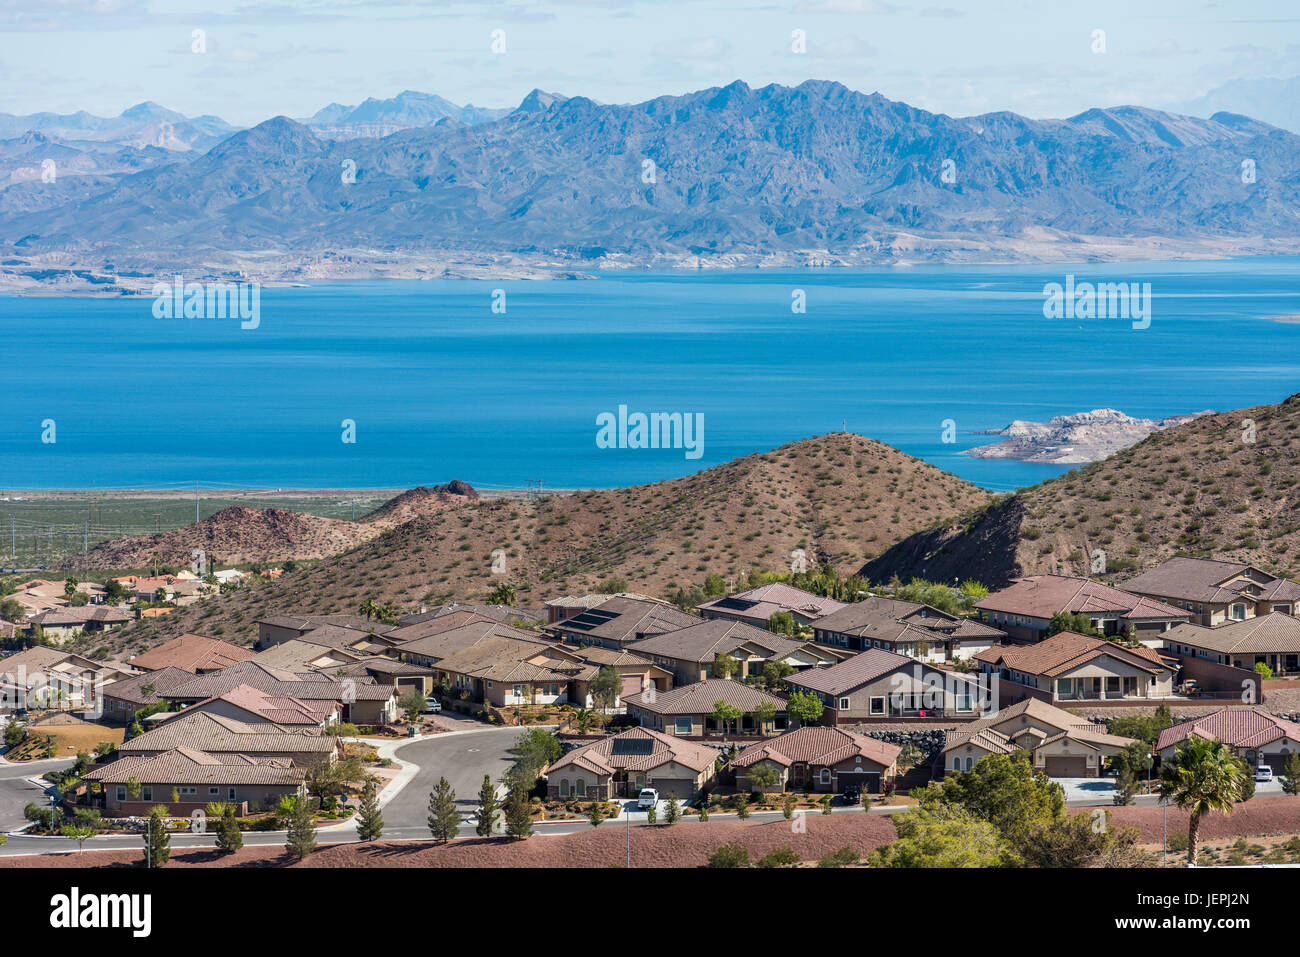 View of the town of Boulder City with mountains in background Stock Photo